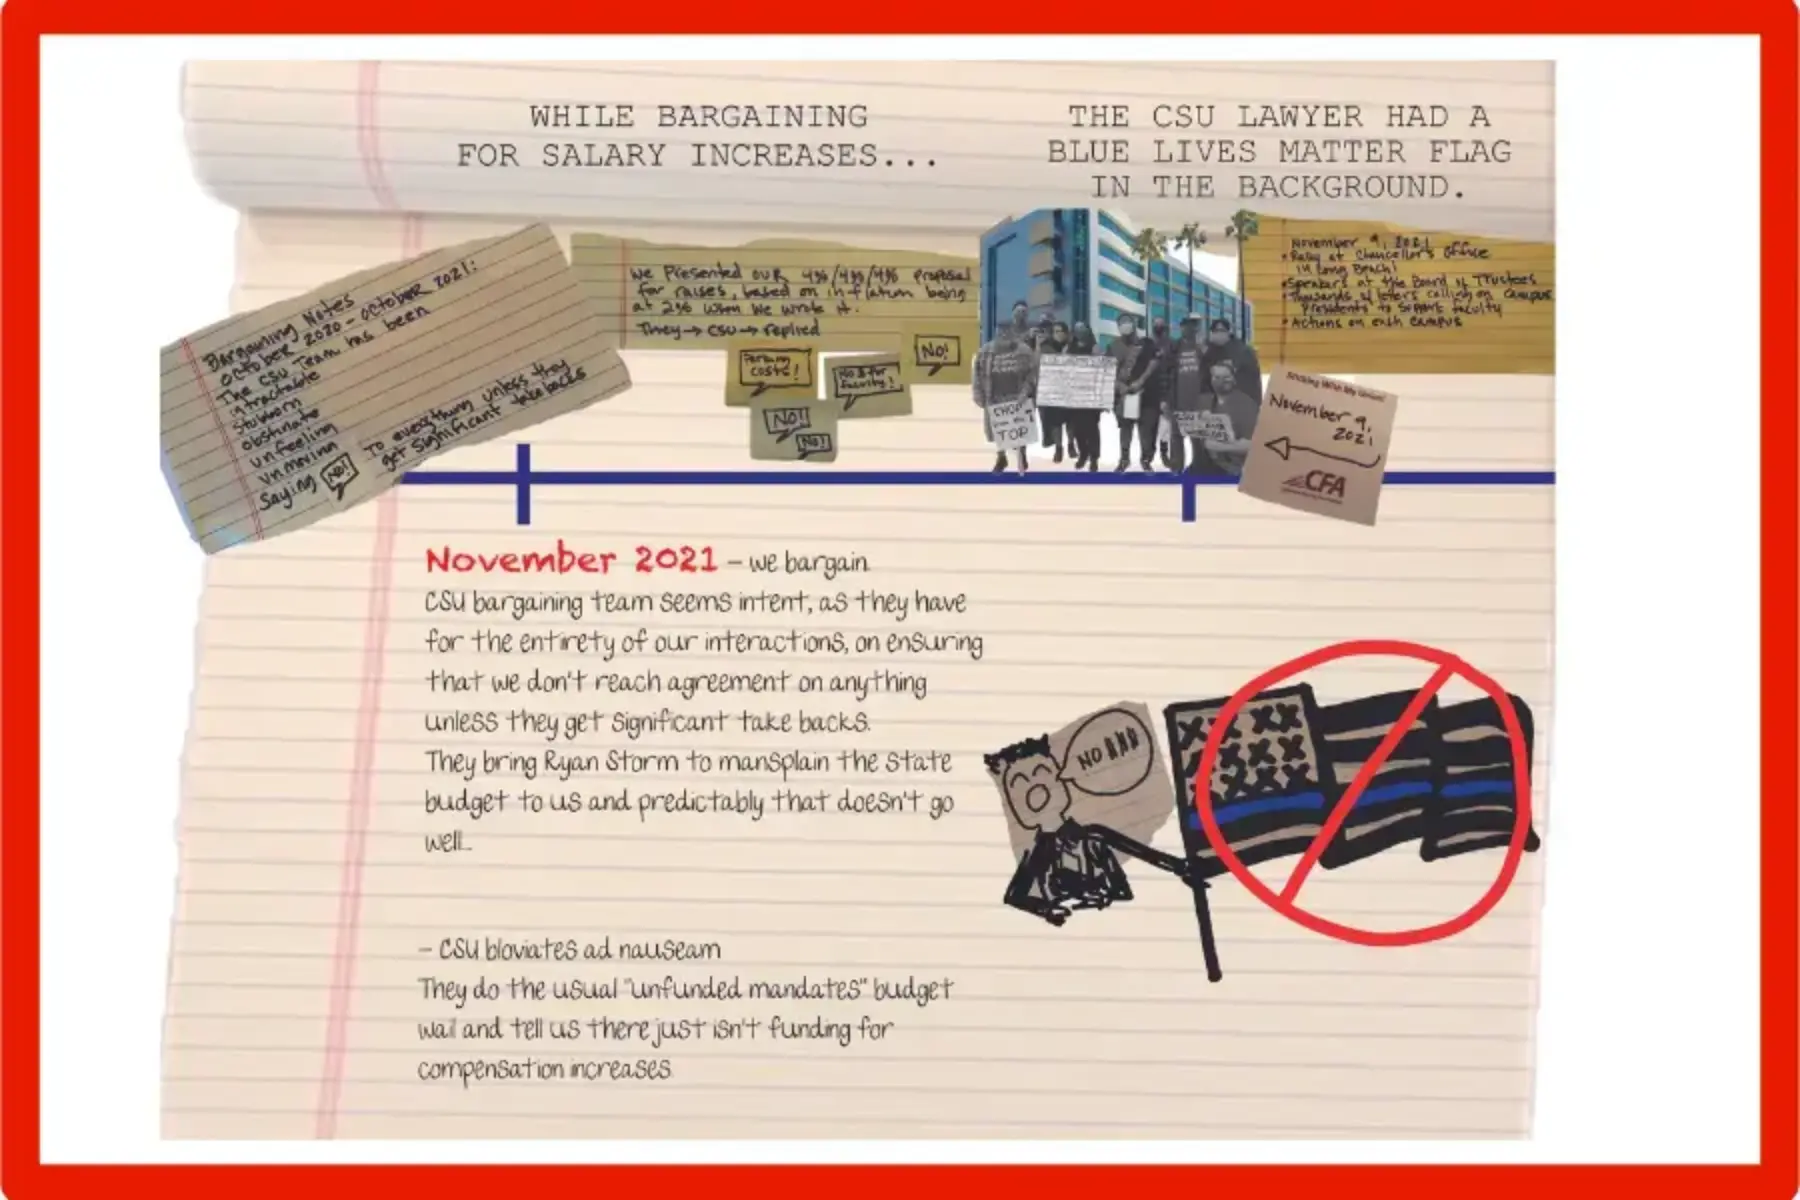 Timeline around November on yellow notebook paper with black text that reads While bargaining for salary increases … The CSU lawyer had a Blue Lives Matter flag in the background. November 2021 – we bargain. CSU bargaining team seems intent, as they have for the entirety of our interactions, on ensuring that we don’t reach agreement on anything unless they get significant takebacks. They bring Ryan Storm to mansplain the state budget to us and predictably that doesn’t go well. CSU bloviates ad nauseam. They do the usual “unfunded mandates” budget mail and tell us there isn’t funding for compensation increases. Images include screenshots of handwritten notes on yellow lined paper, a stick figure holding a Blue Lives Matter flag with a red circle and line drawn through it.